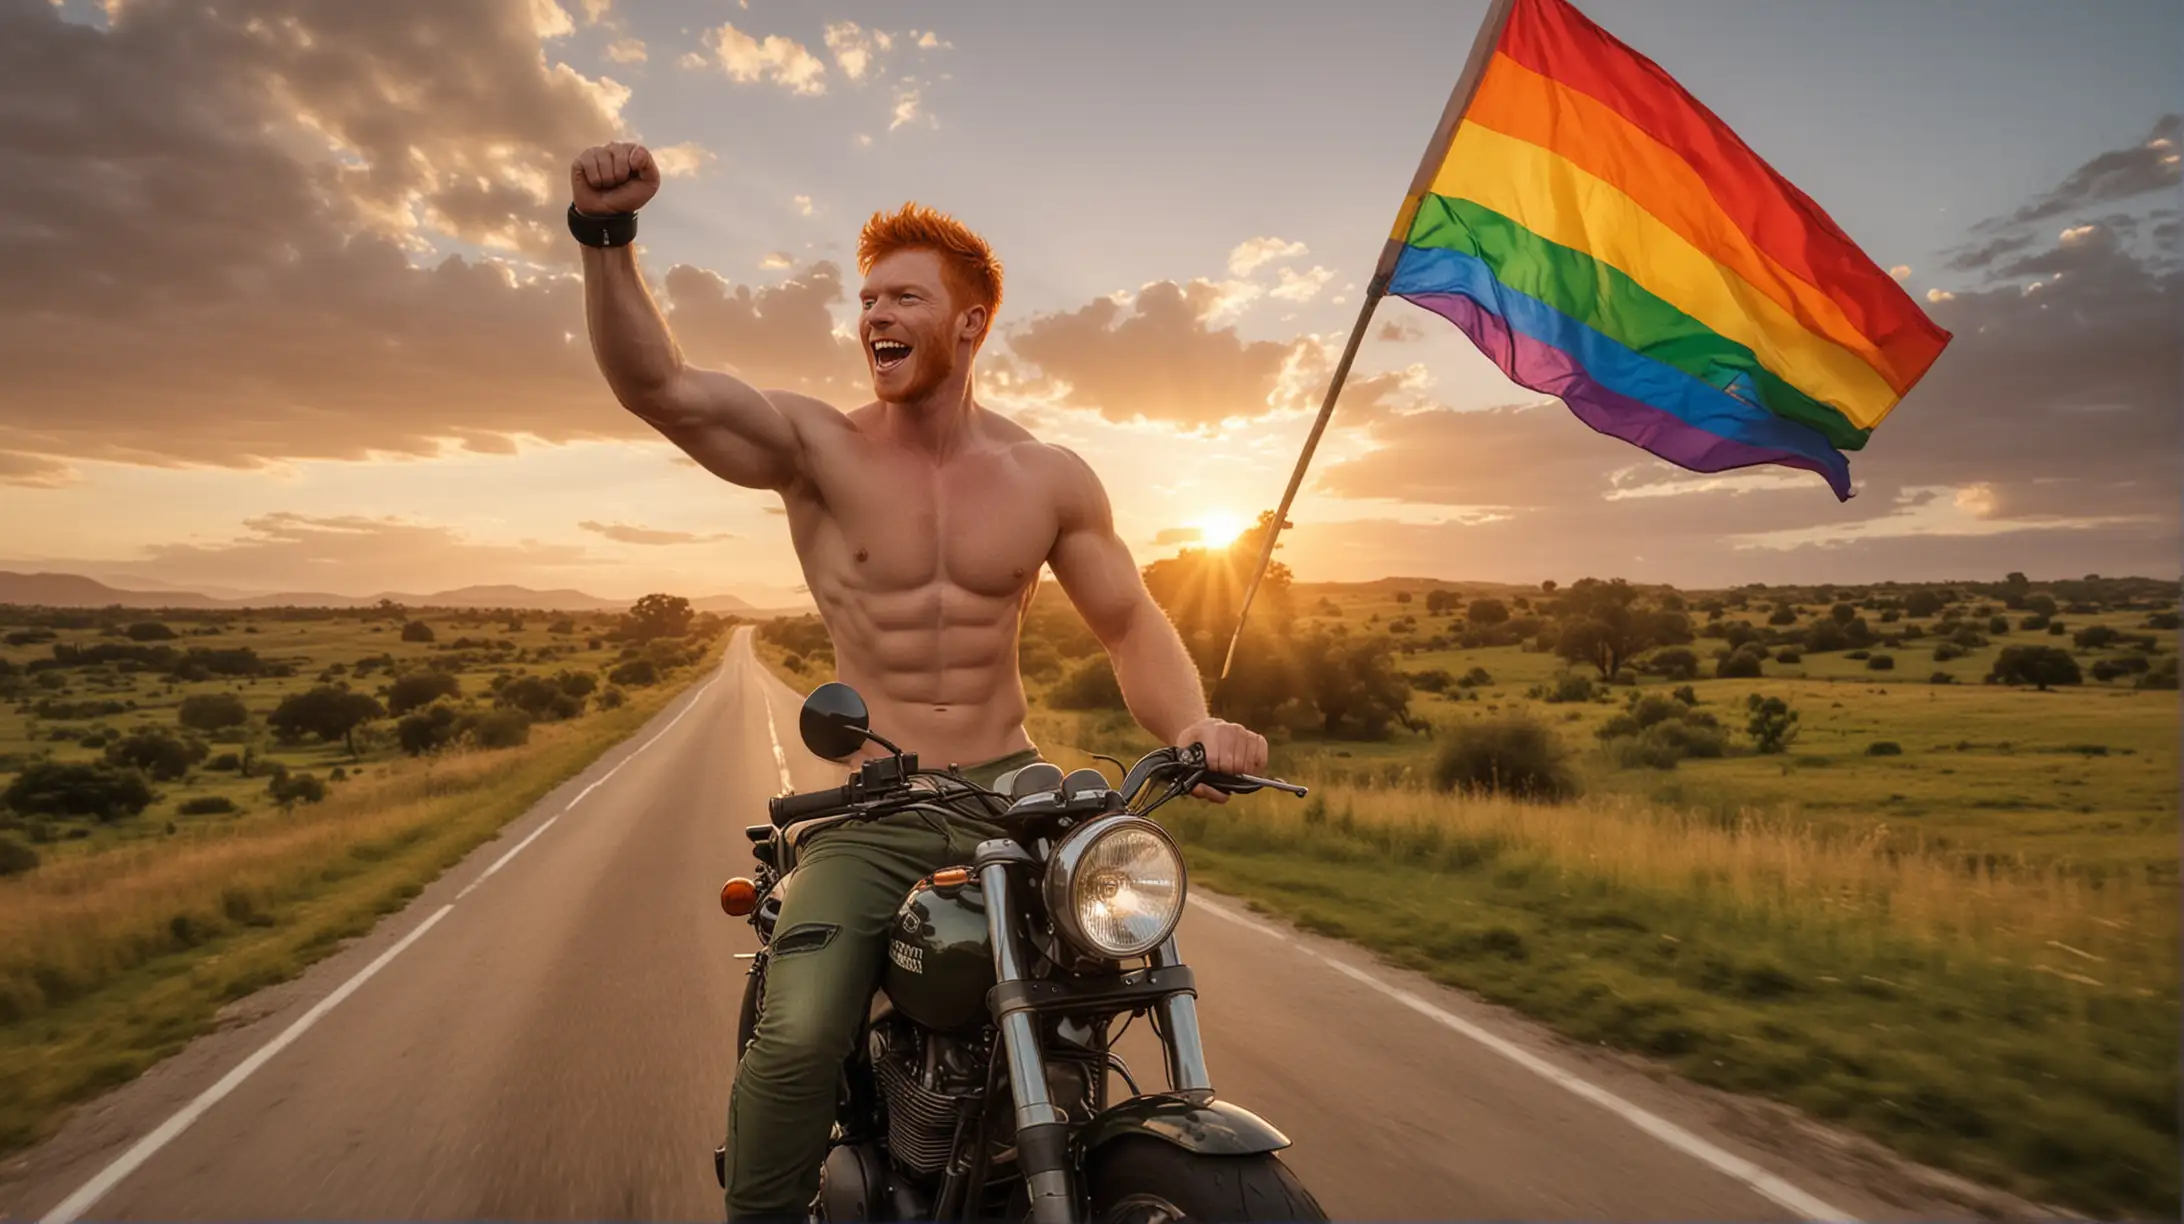 A handsome shirtless ginger hunk is riding his roaring motorcycle across the sunset landscape, with a pride flag in his hand. The happiness and yearn for freedom are sparkling in his green eyes.